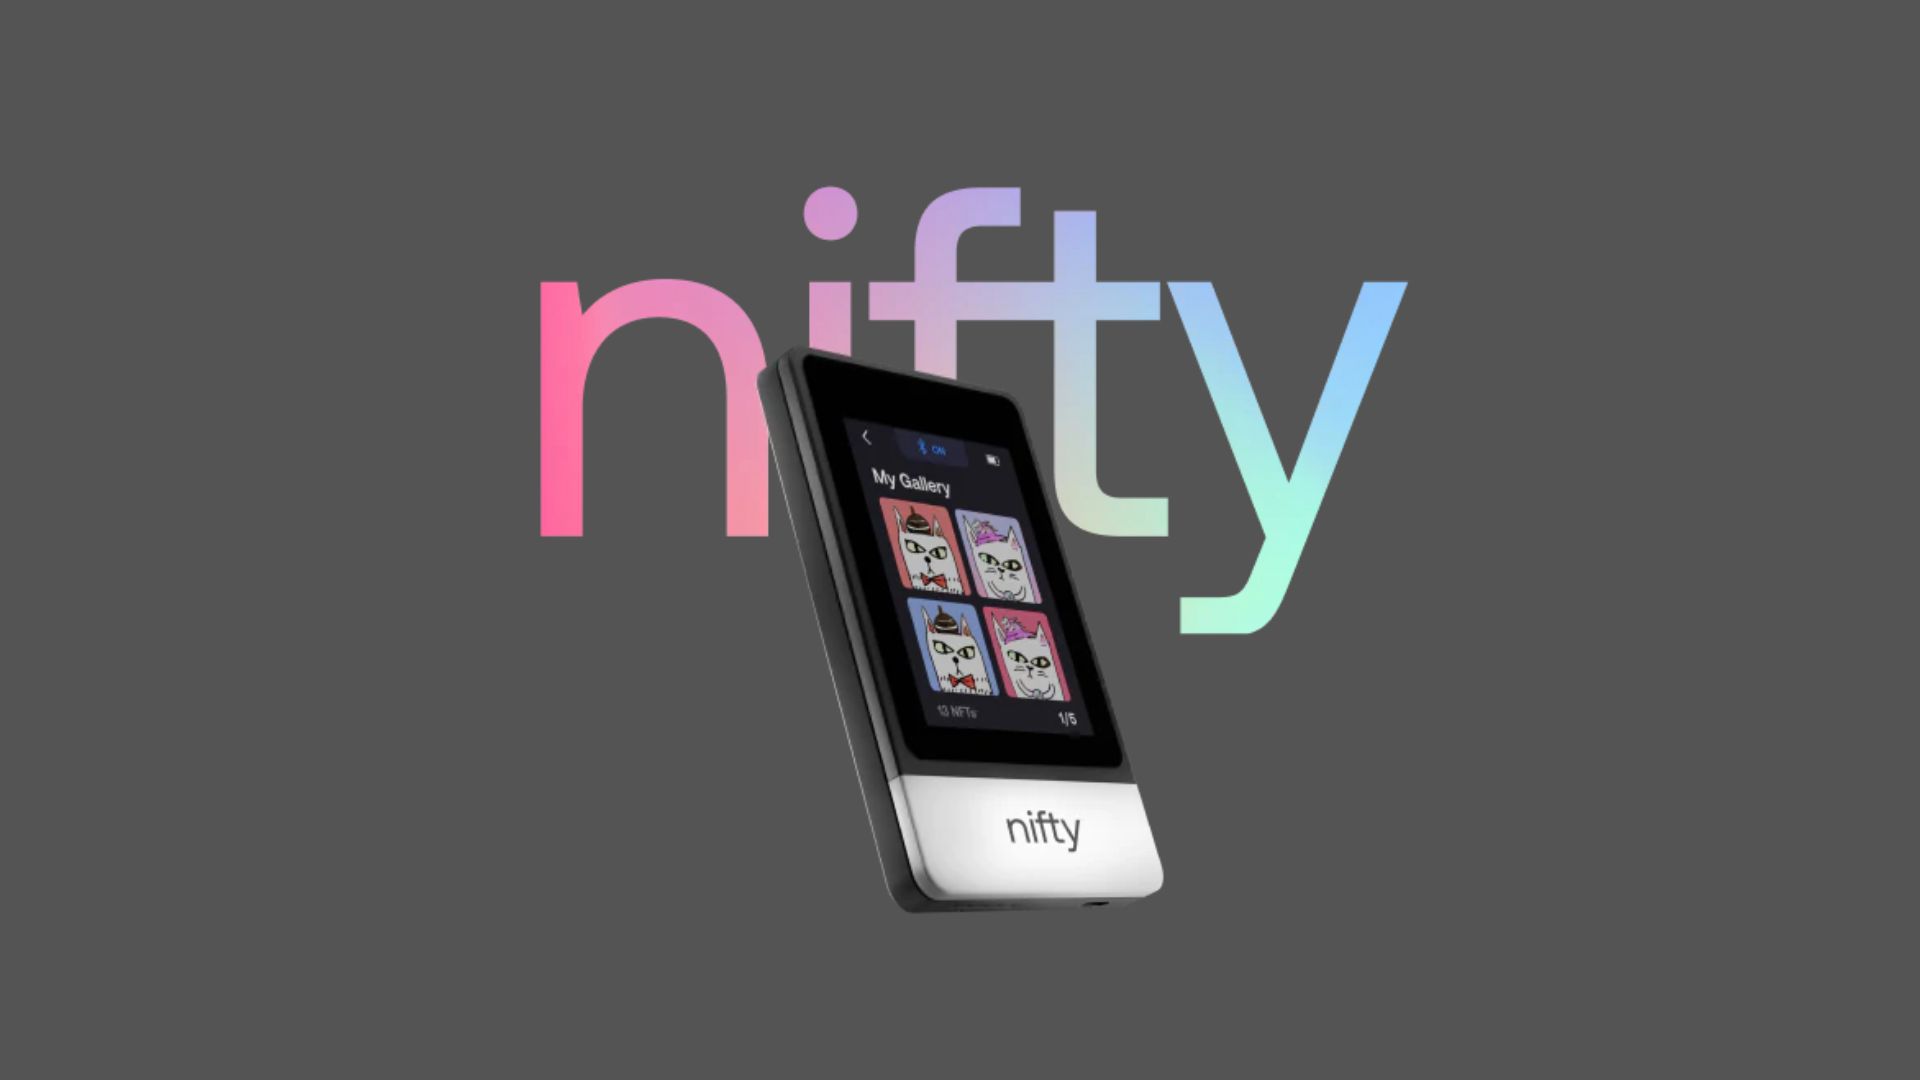 SecuX Nifty NFT Hardware Wallet: The Most Secure Way to Store NFTs